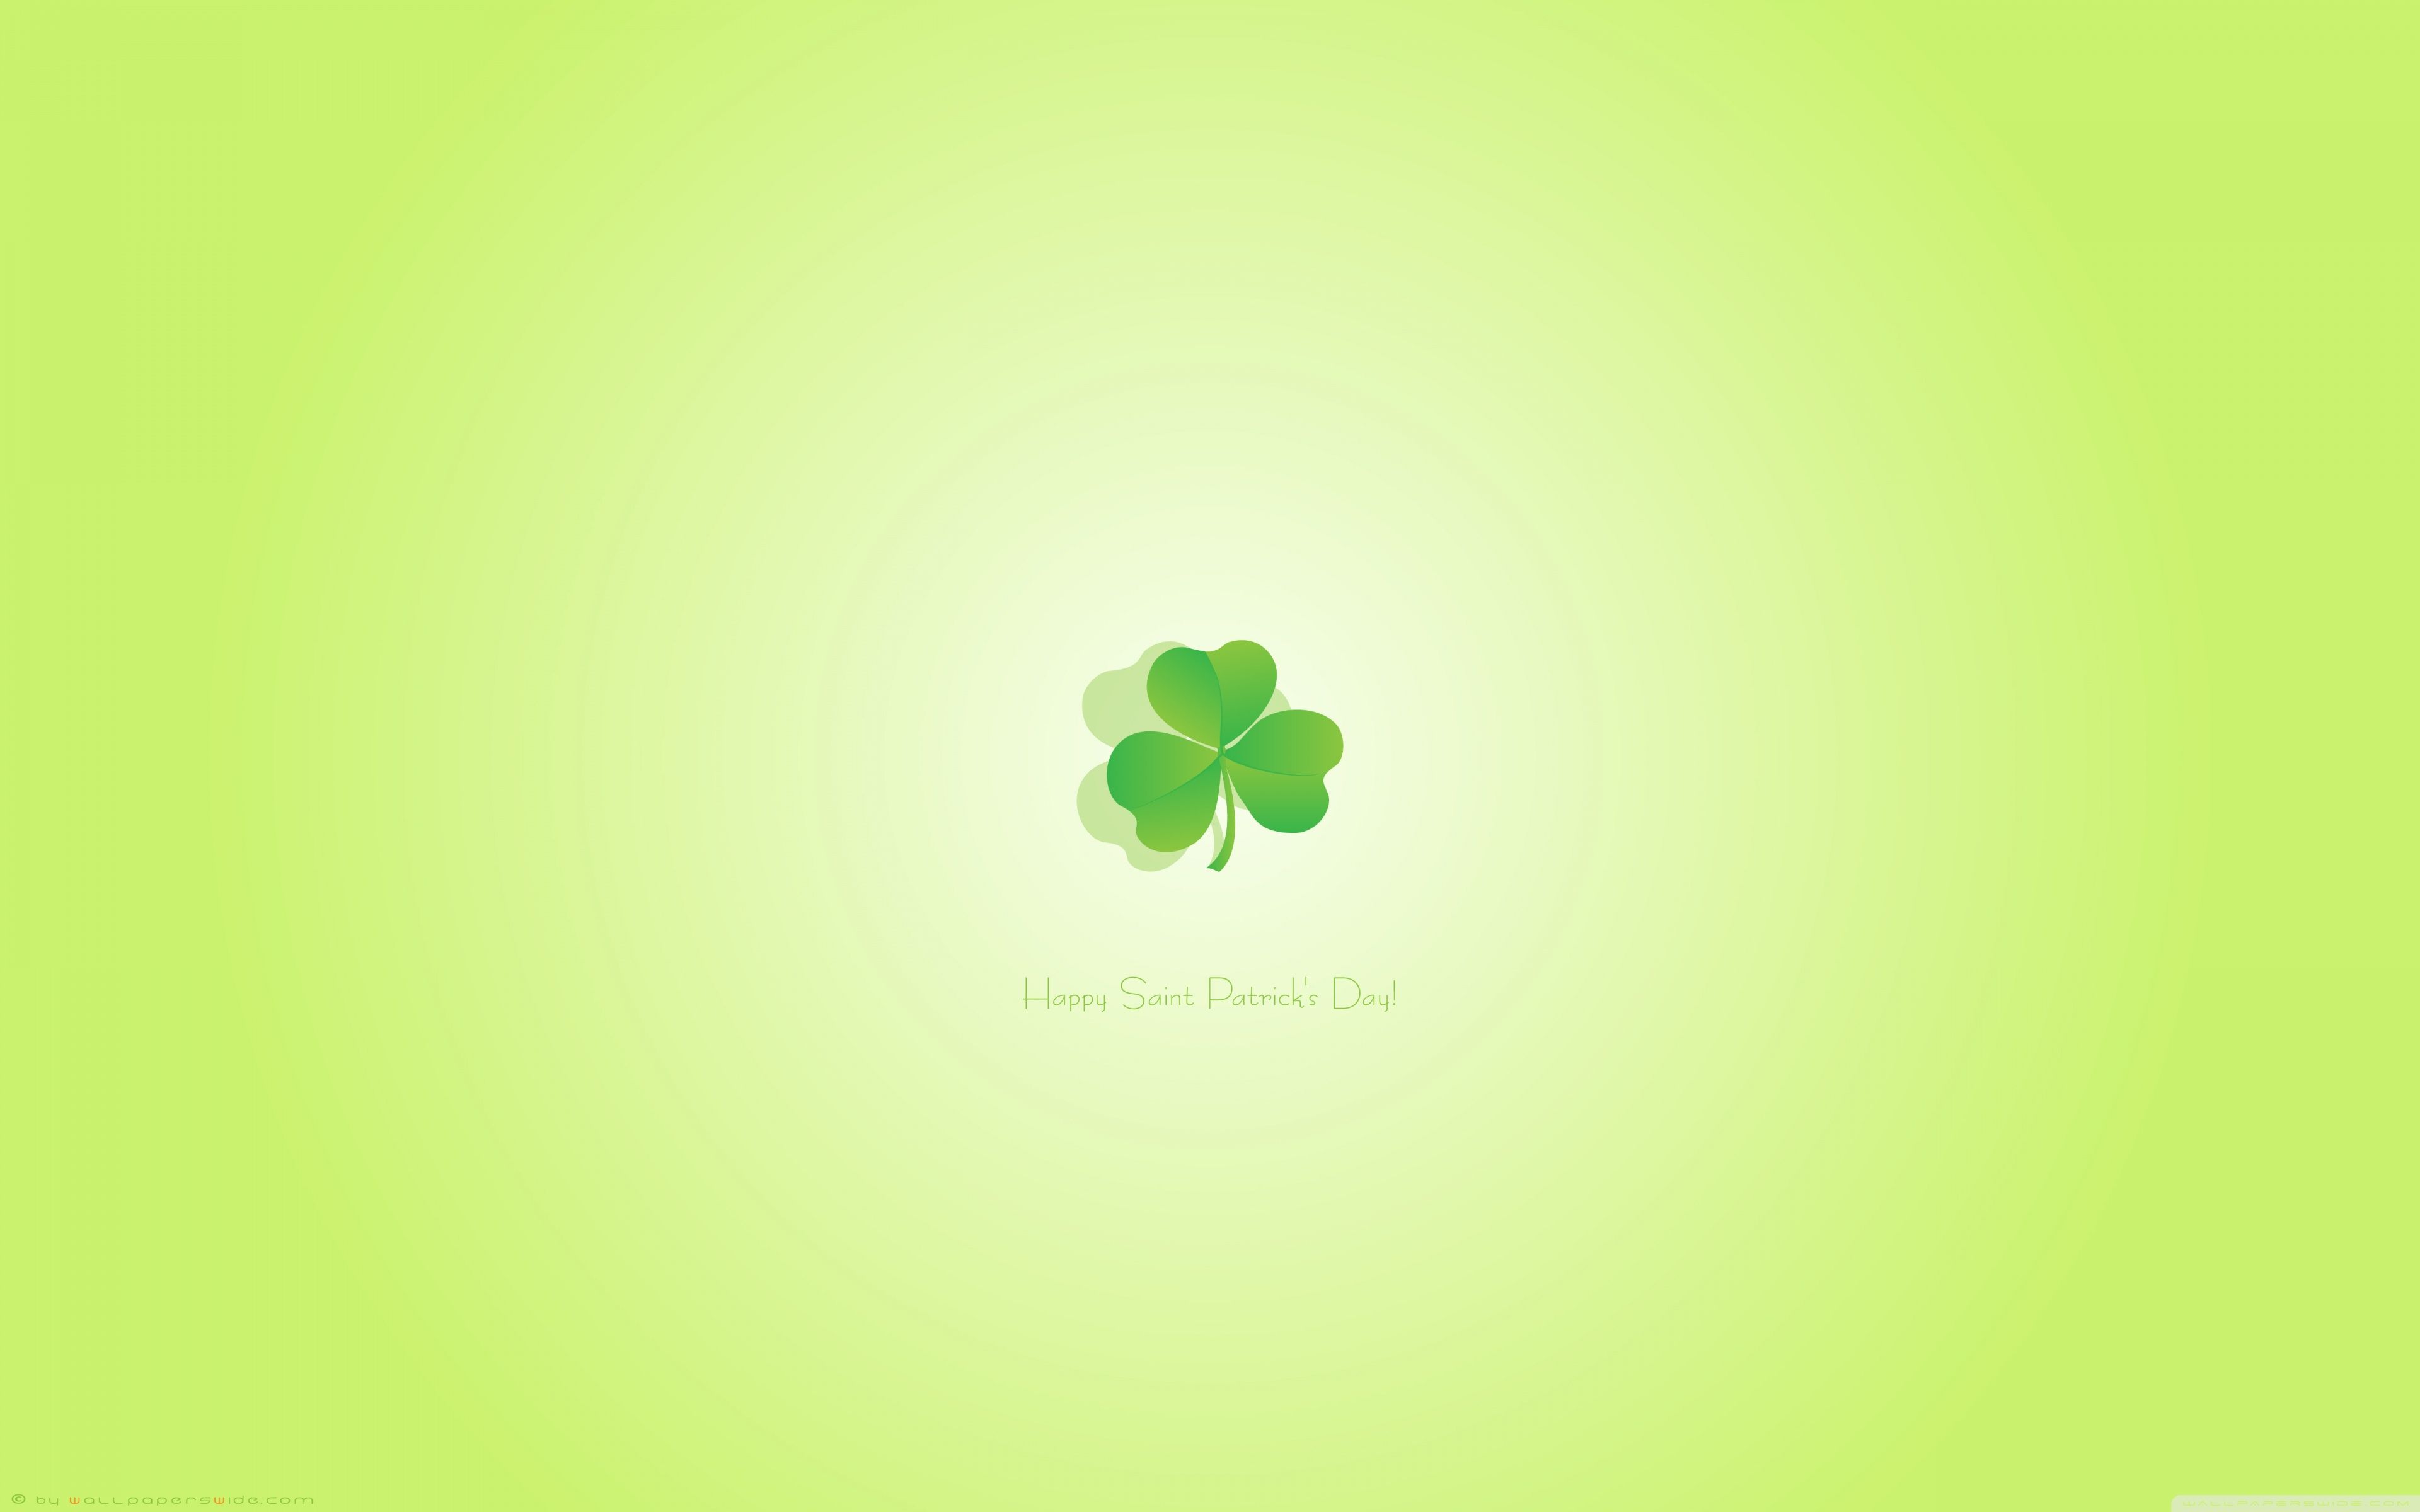 Happy Saint Patrick's Day Ultra HD Desktop Background Wallpaper for: Multi Display, Dual Monitor, Tablet